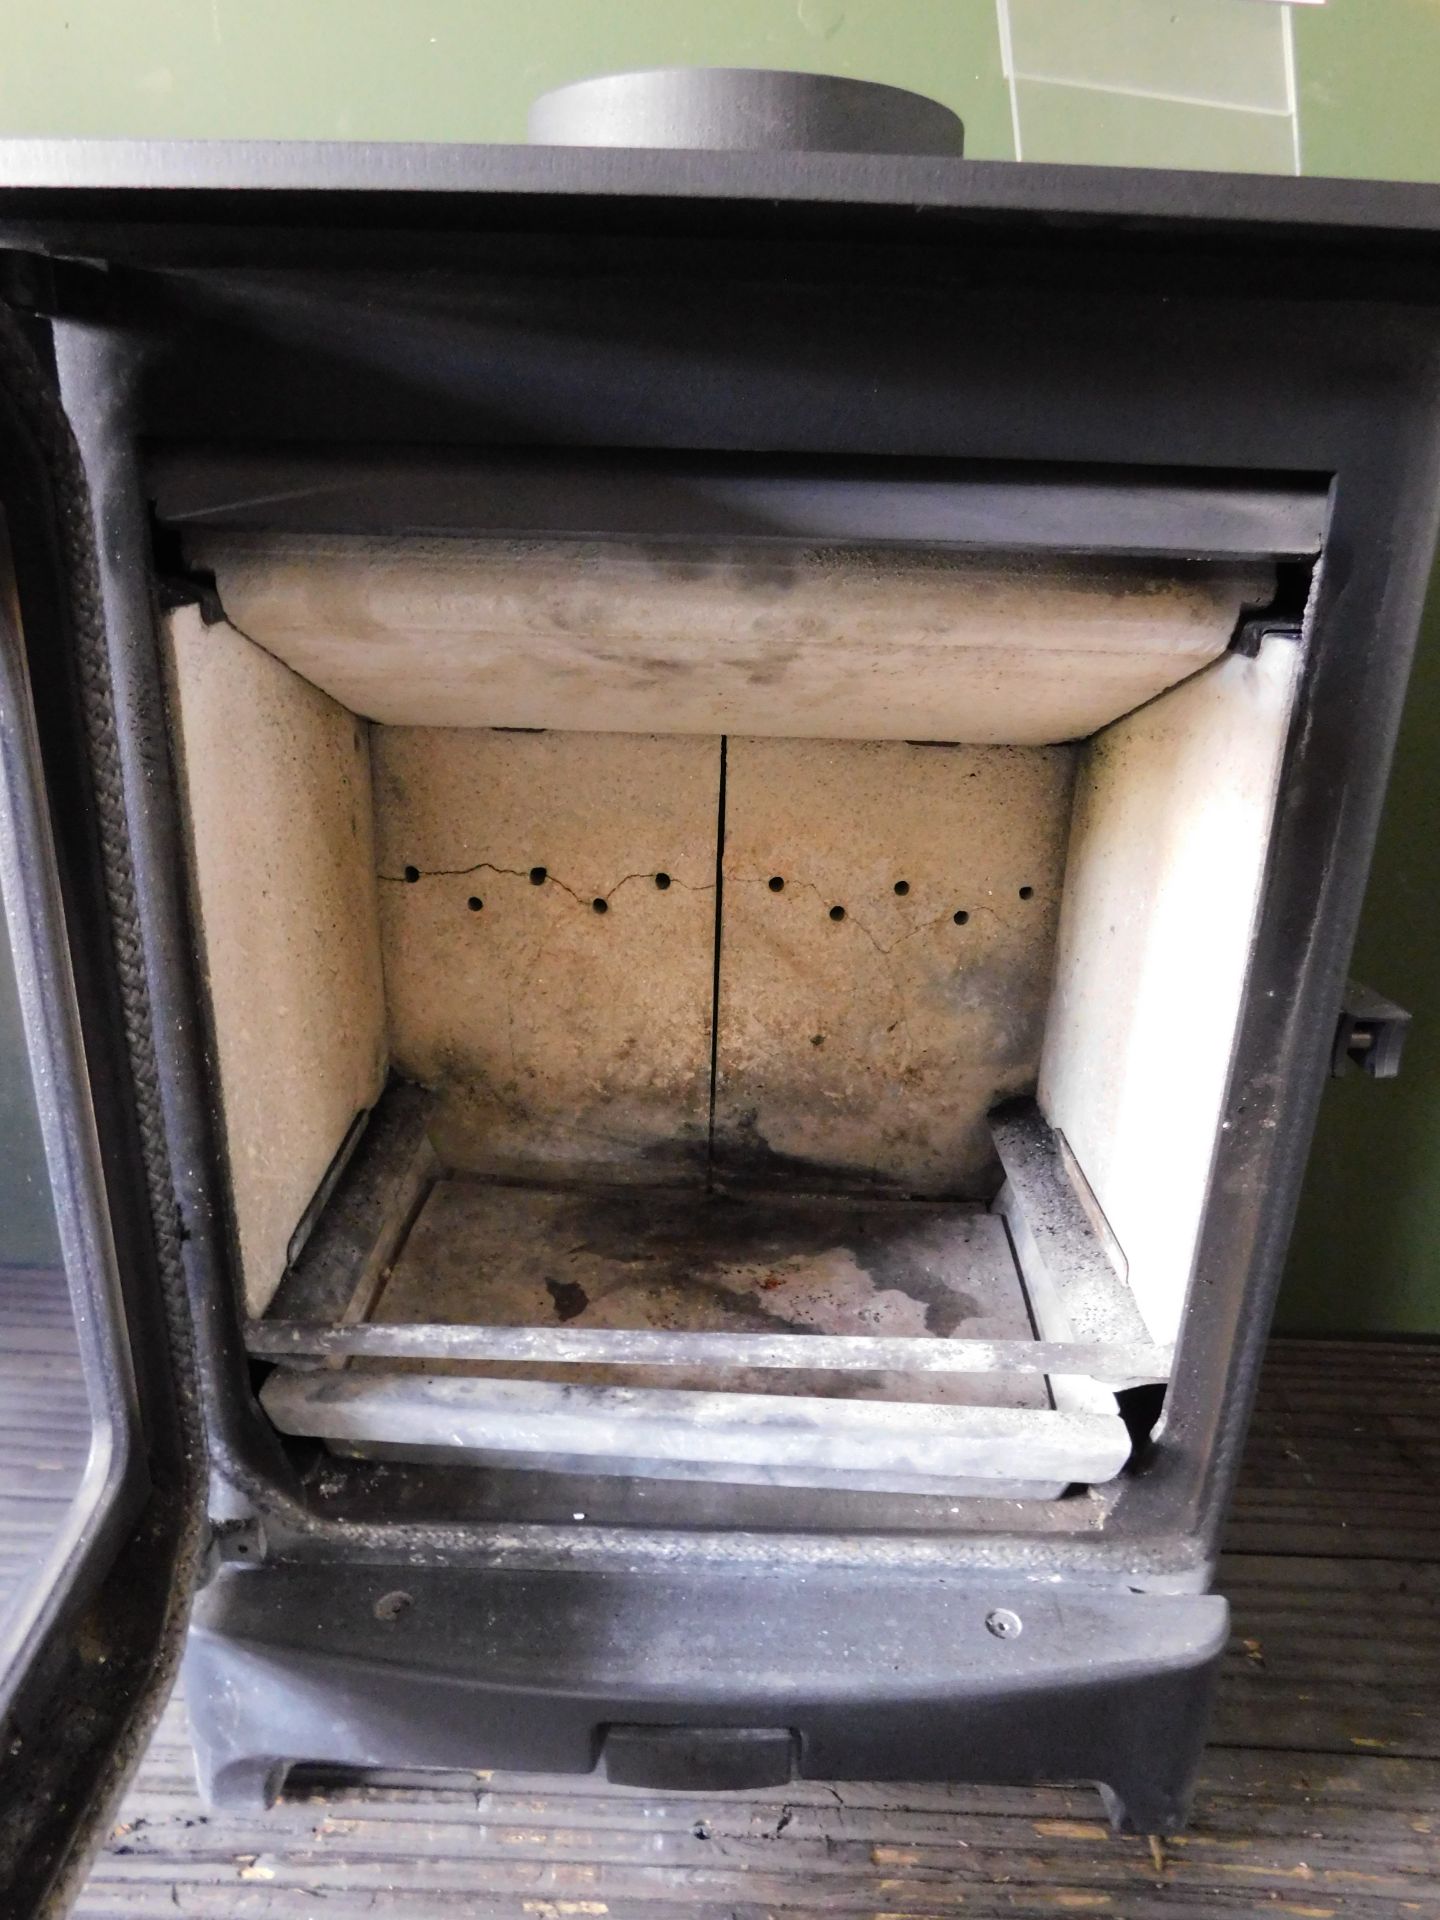 Ex-Display Chesney “Beaumont 5” 4.9kw Woodburning Stove (Where the company’s description/price - Image 2 of 3